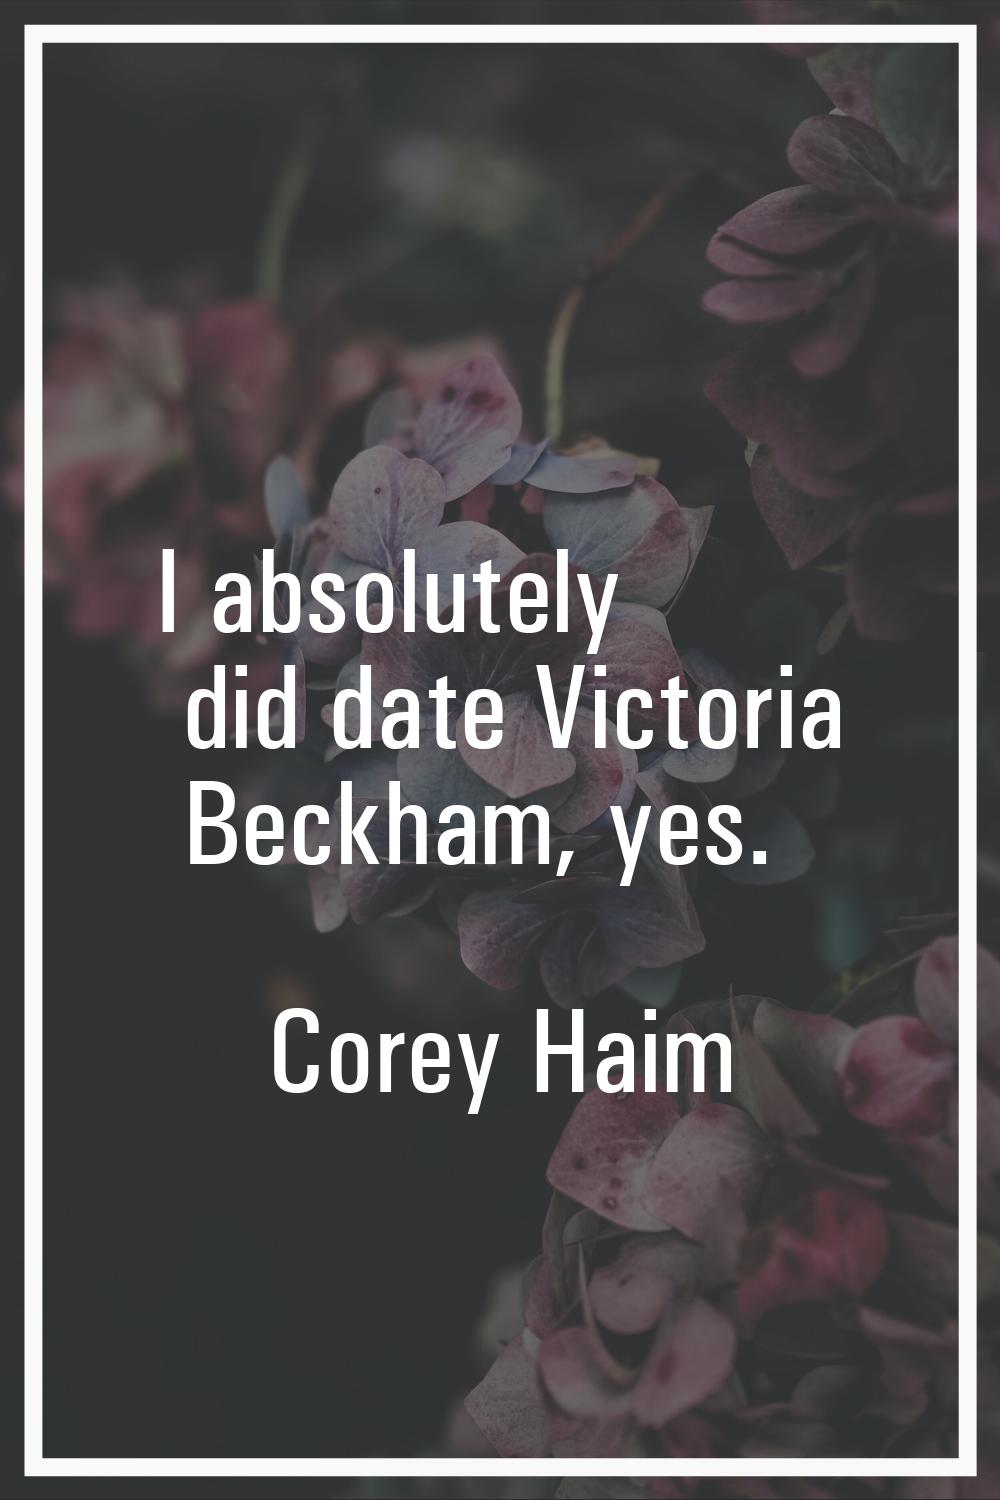 I absolutely did date Victoria Beckham, yes.